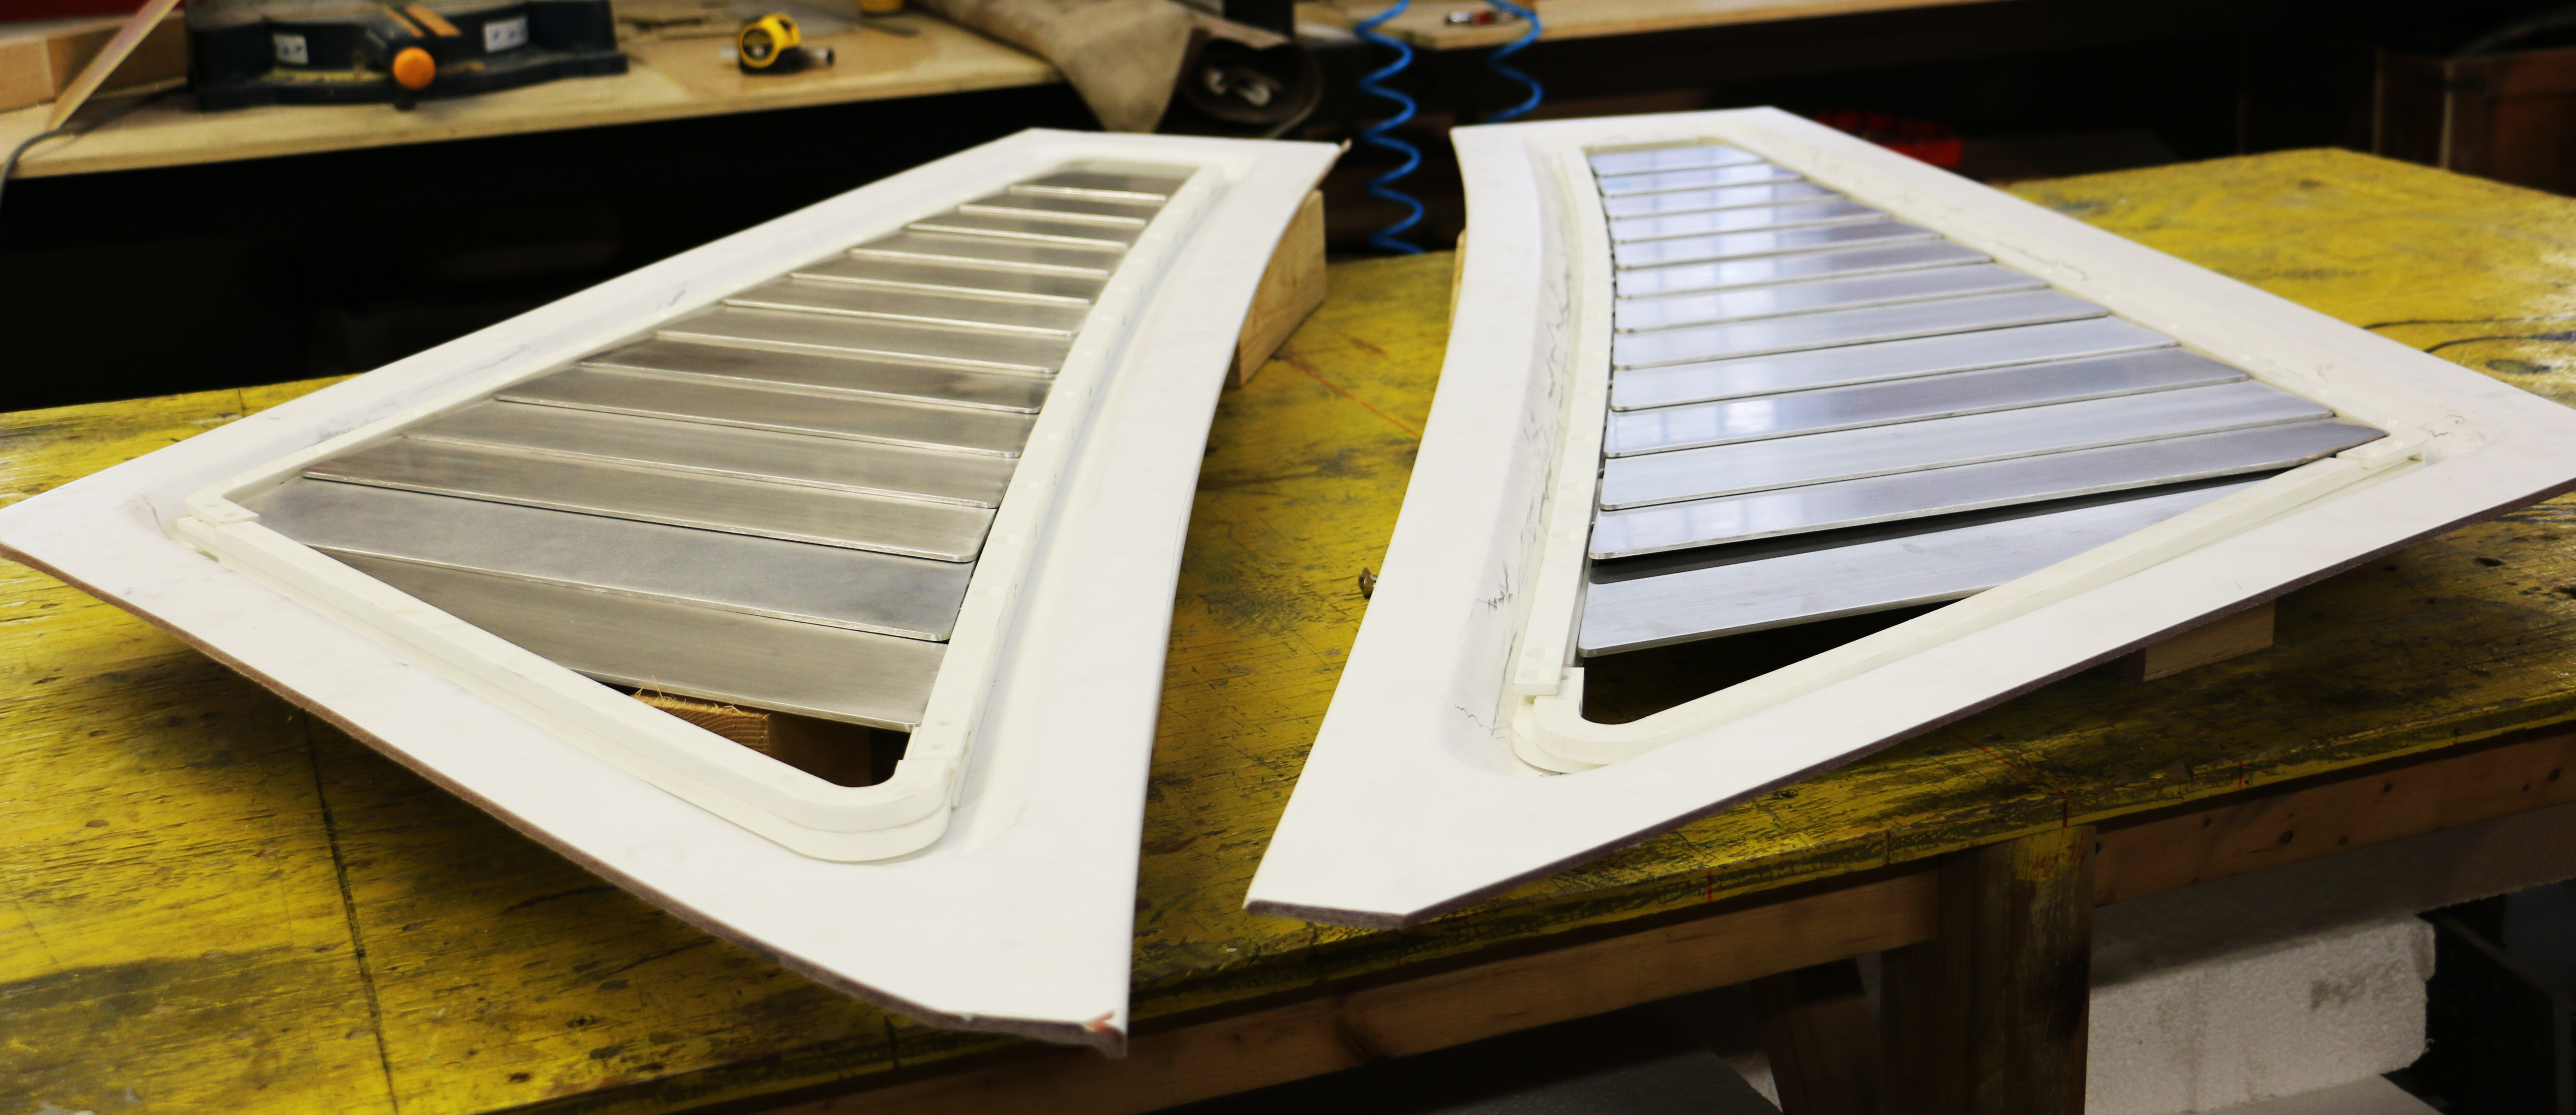 assembled louvers on a table.